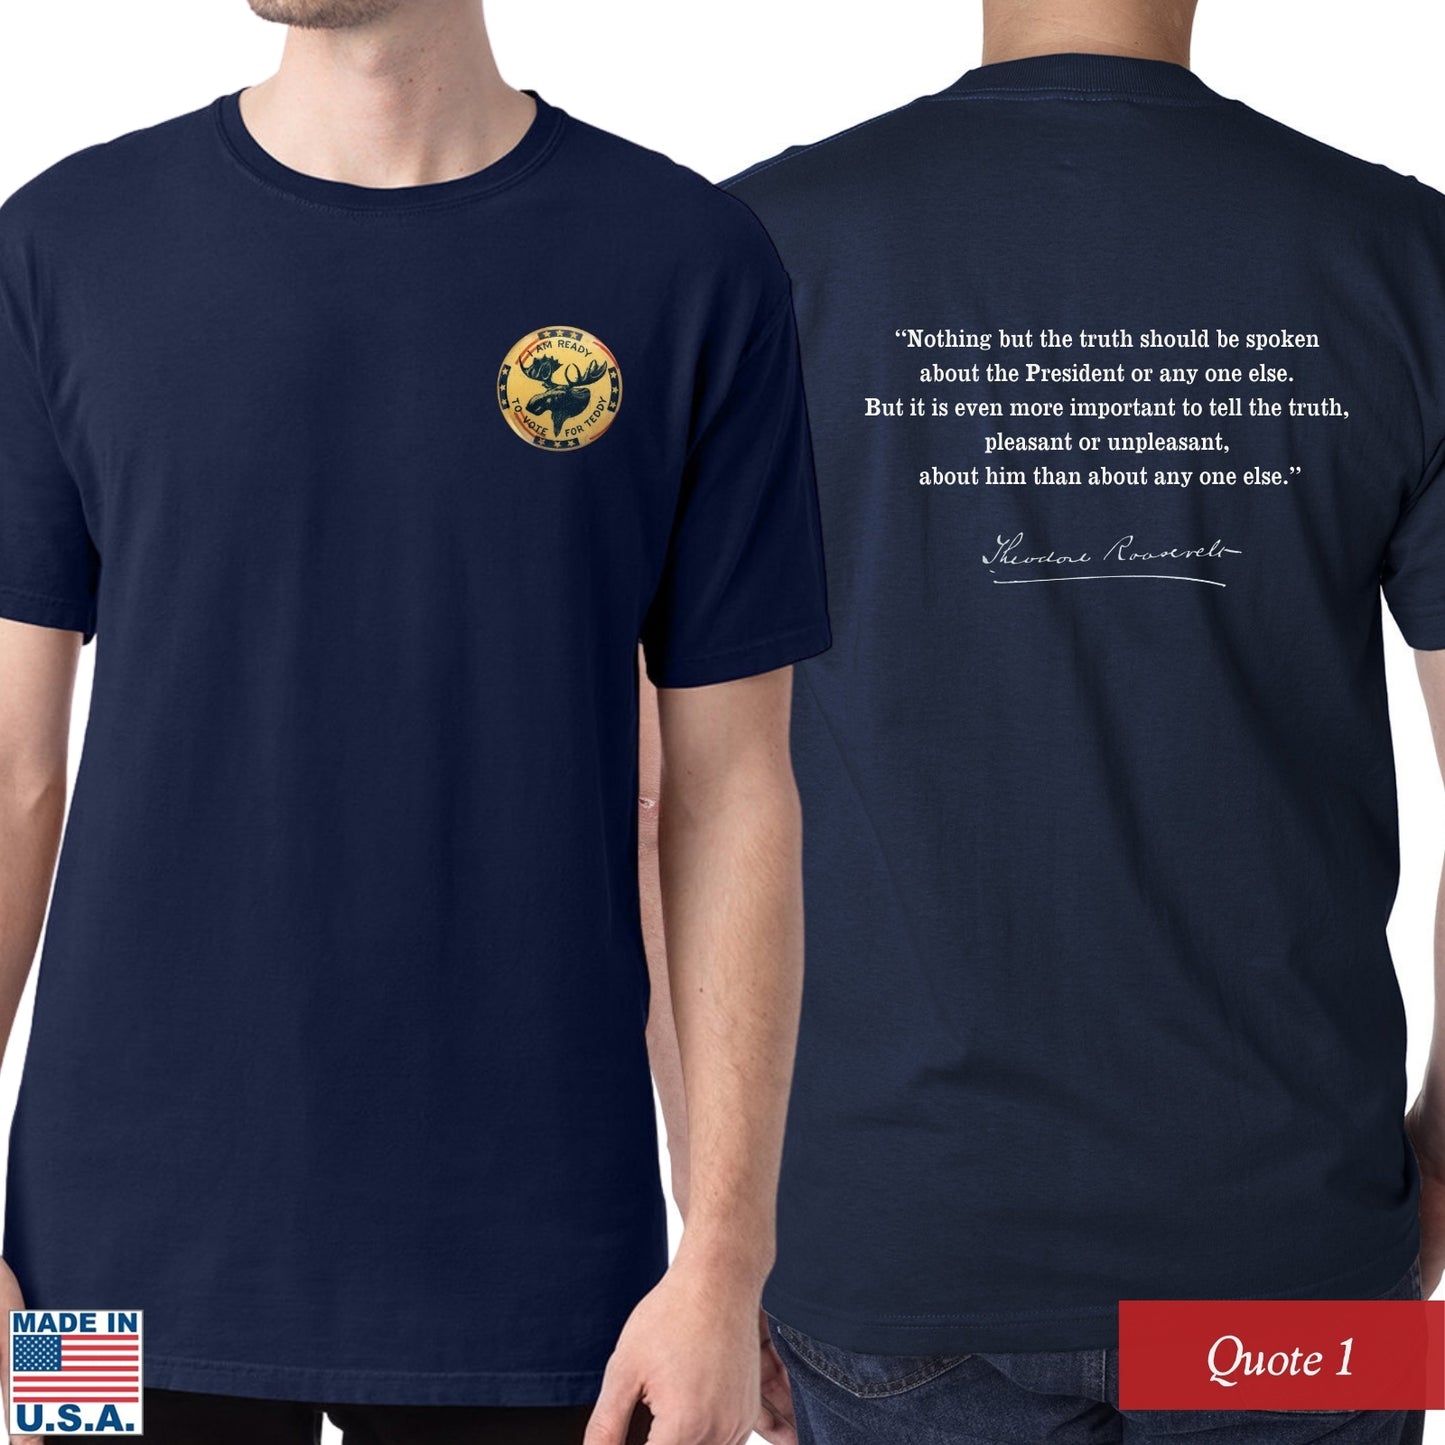 Quote 1 of the Teddy Roosevelt “I’m ready to vote for Teddy” presidential campaign shirt — Made in America from The History List store